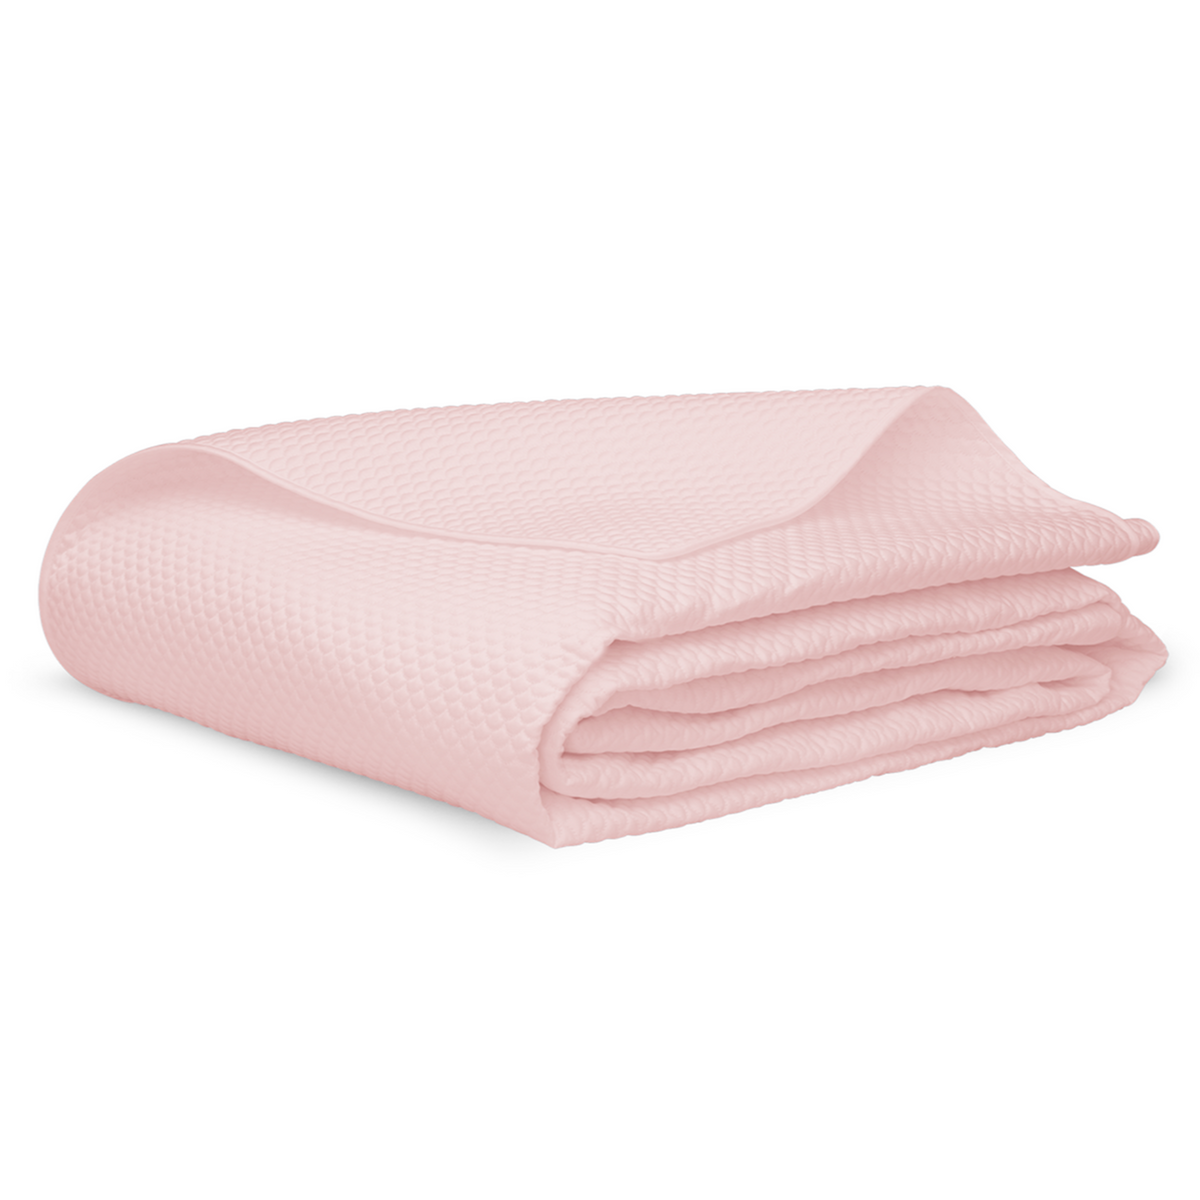 Sample Image of Matouk Alba Bedding Quilted Coverlet Sham Pink